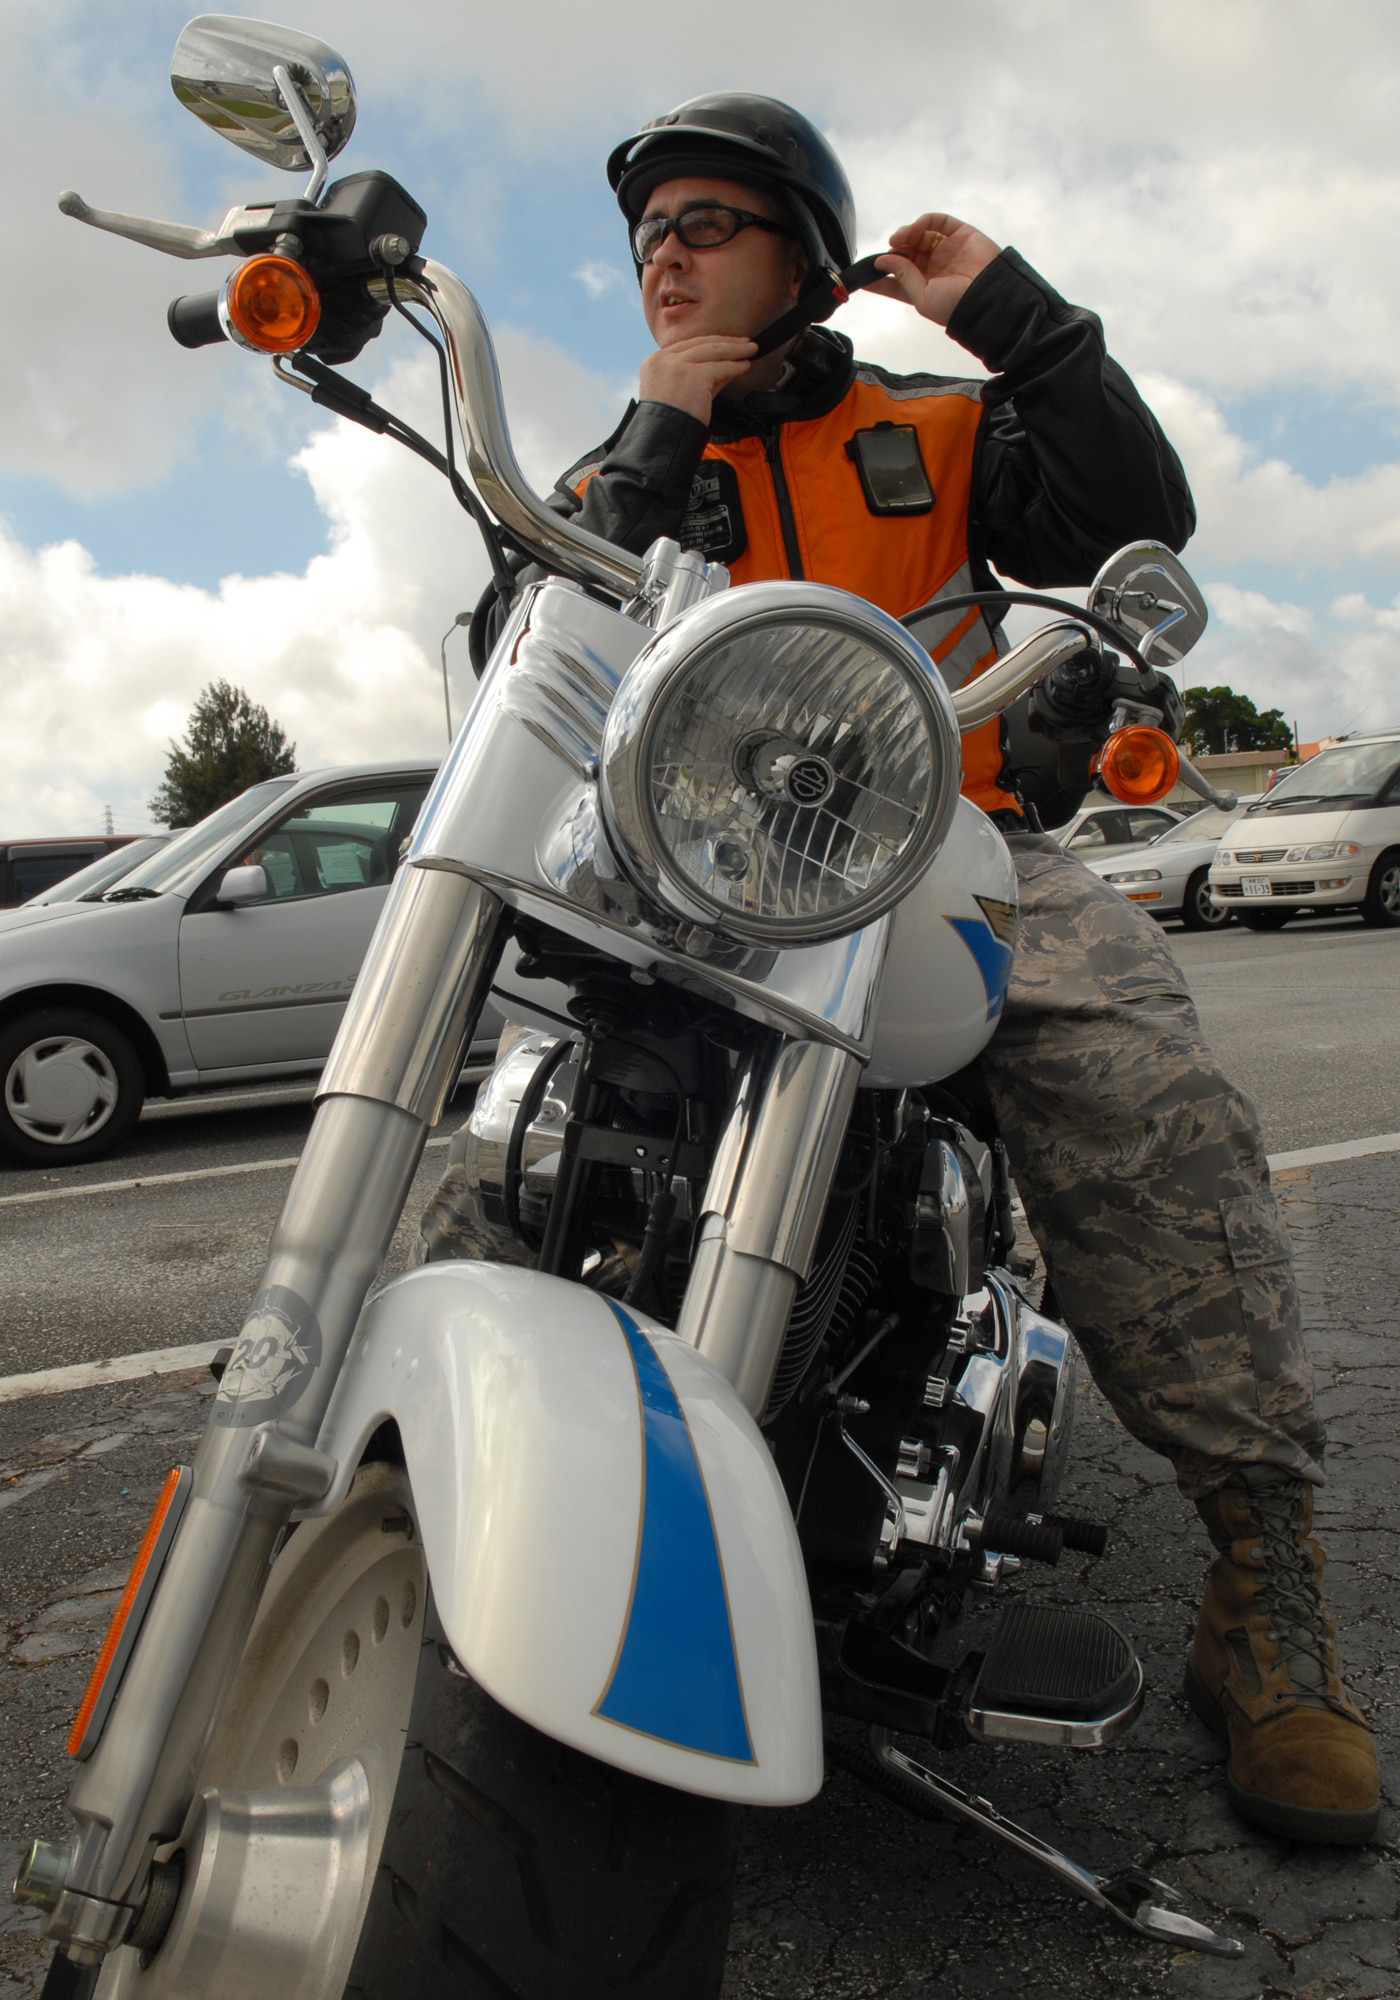 Tech. Sgt. Jason Edwards, the 18th Wing Motorcycle Safety Representative from the Public Affairs Office, demonstrates proper wear of personal protective gear for Motorcycle Safety Day at Kadena Air Base, Japan May 18. 
(U.S. Air Force photo/Tech. Sgt. Angelique Perez) 